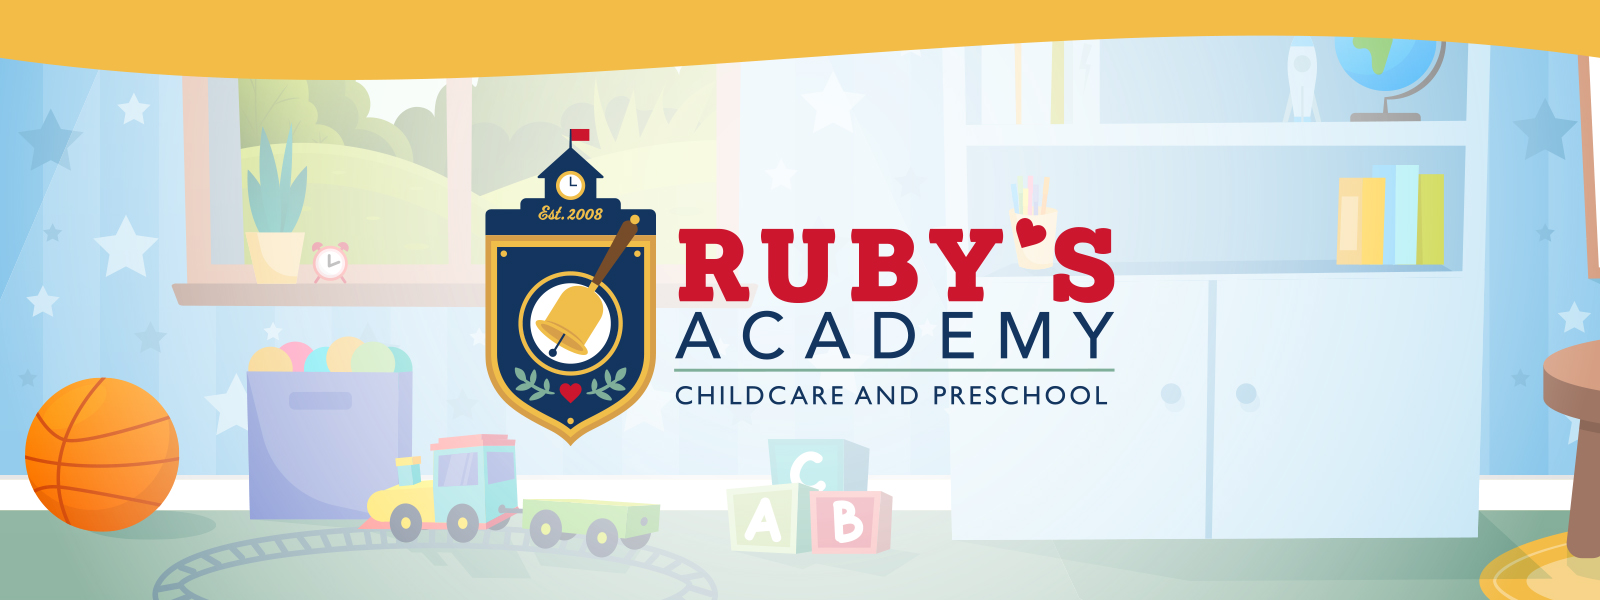 Ruby's Academy Logo Graphic